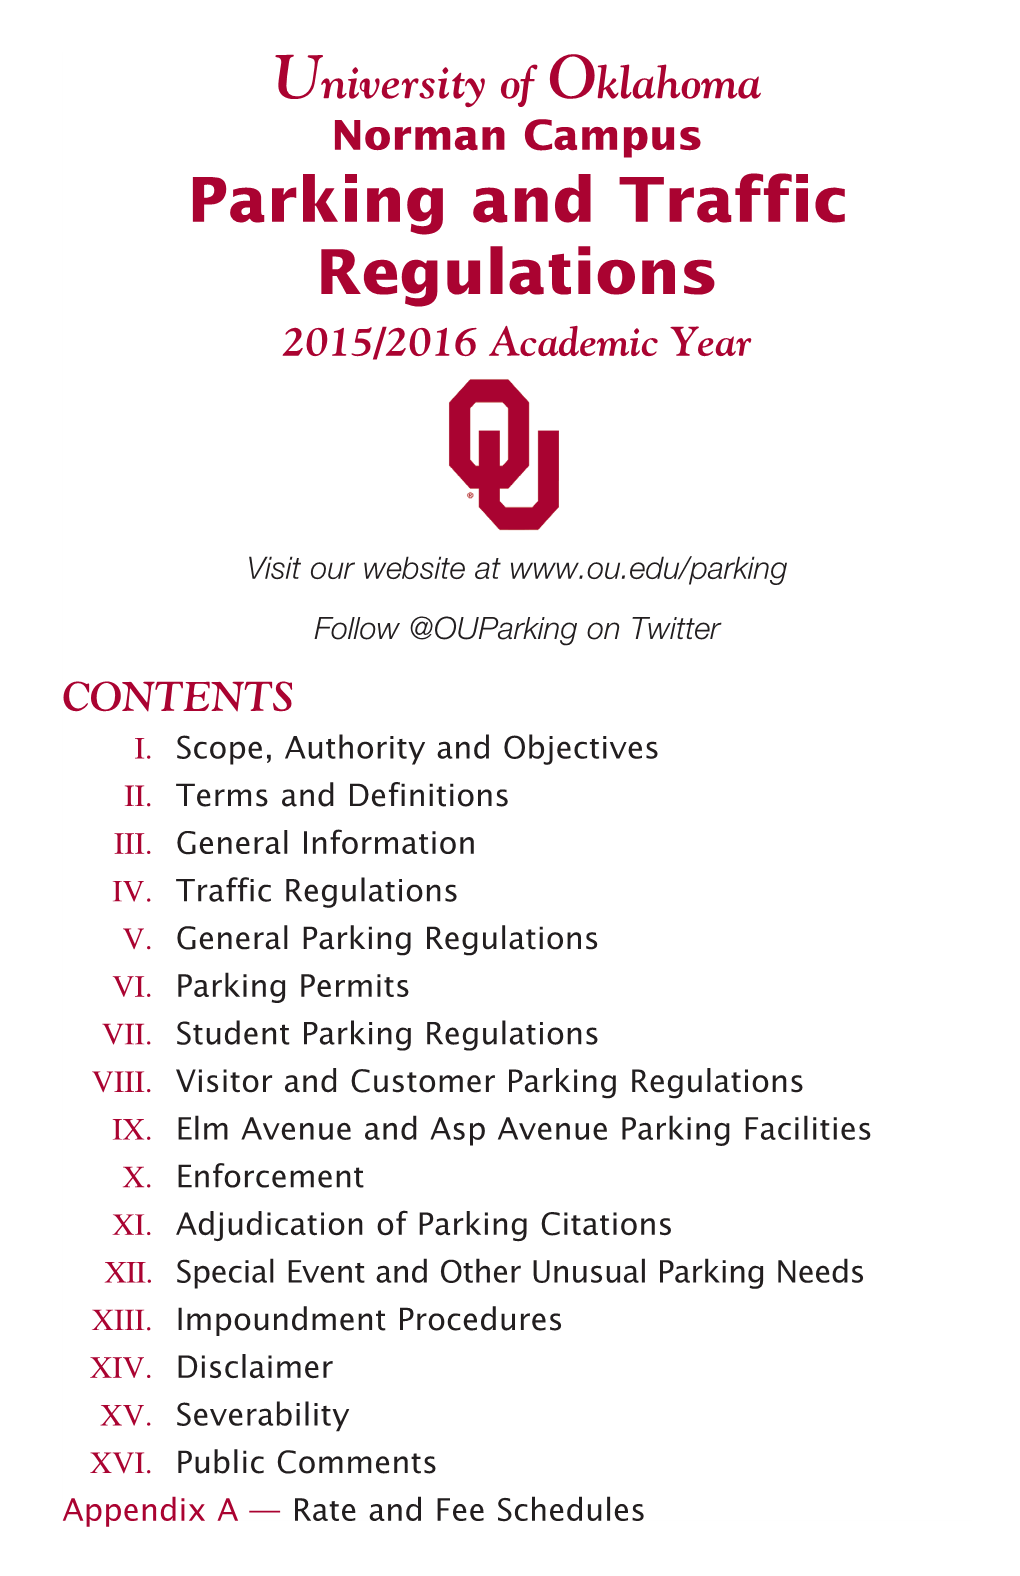 Norman Campus Parking and Traffic Regulations 2015/2016 Academic Year